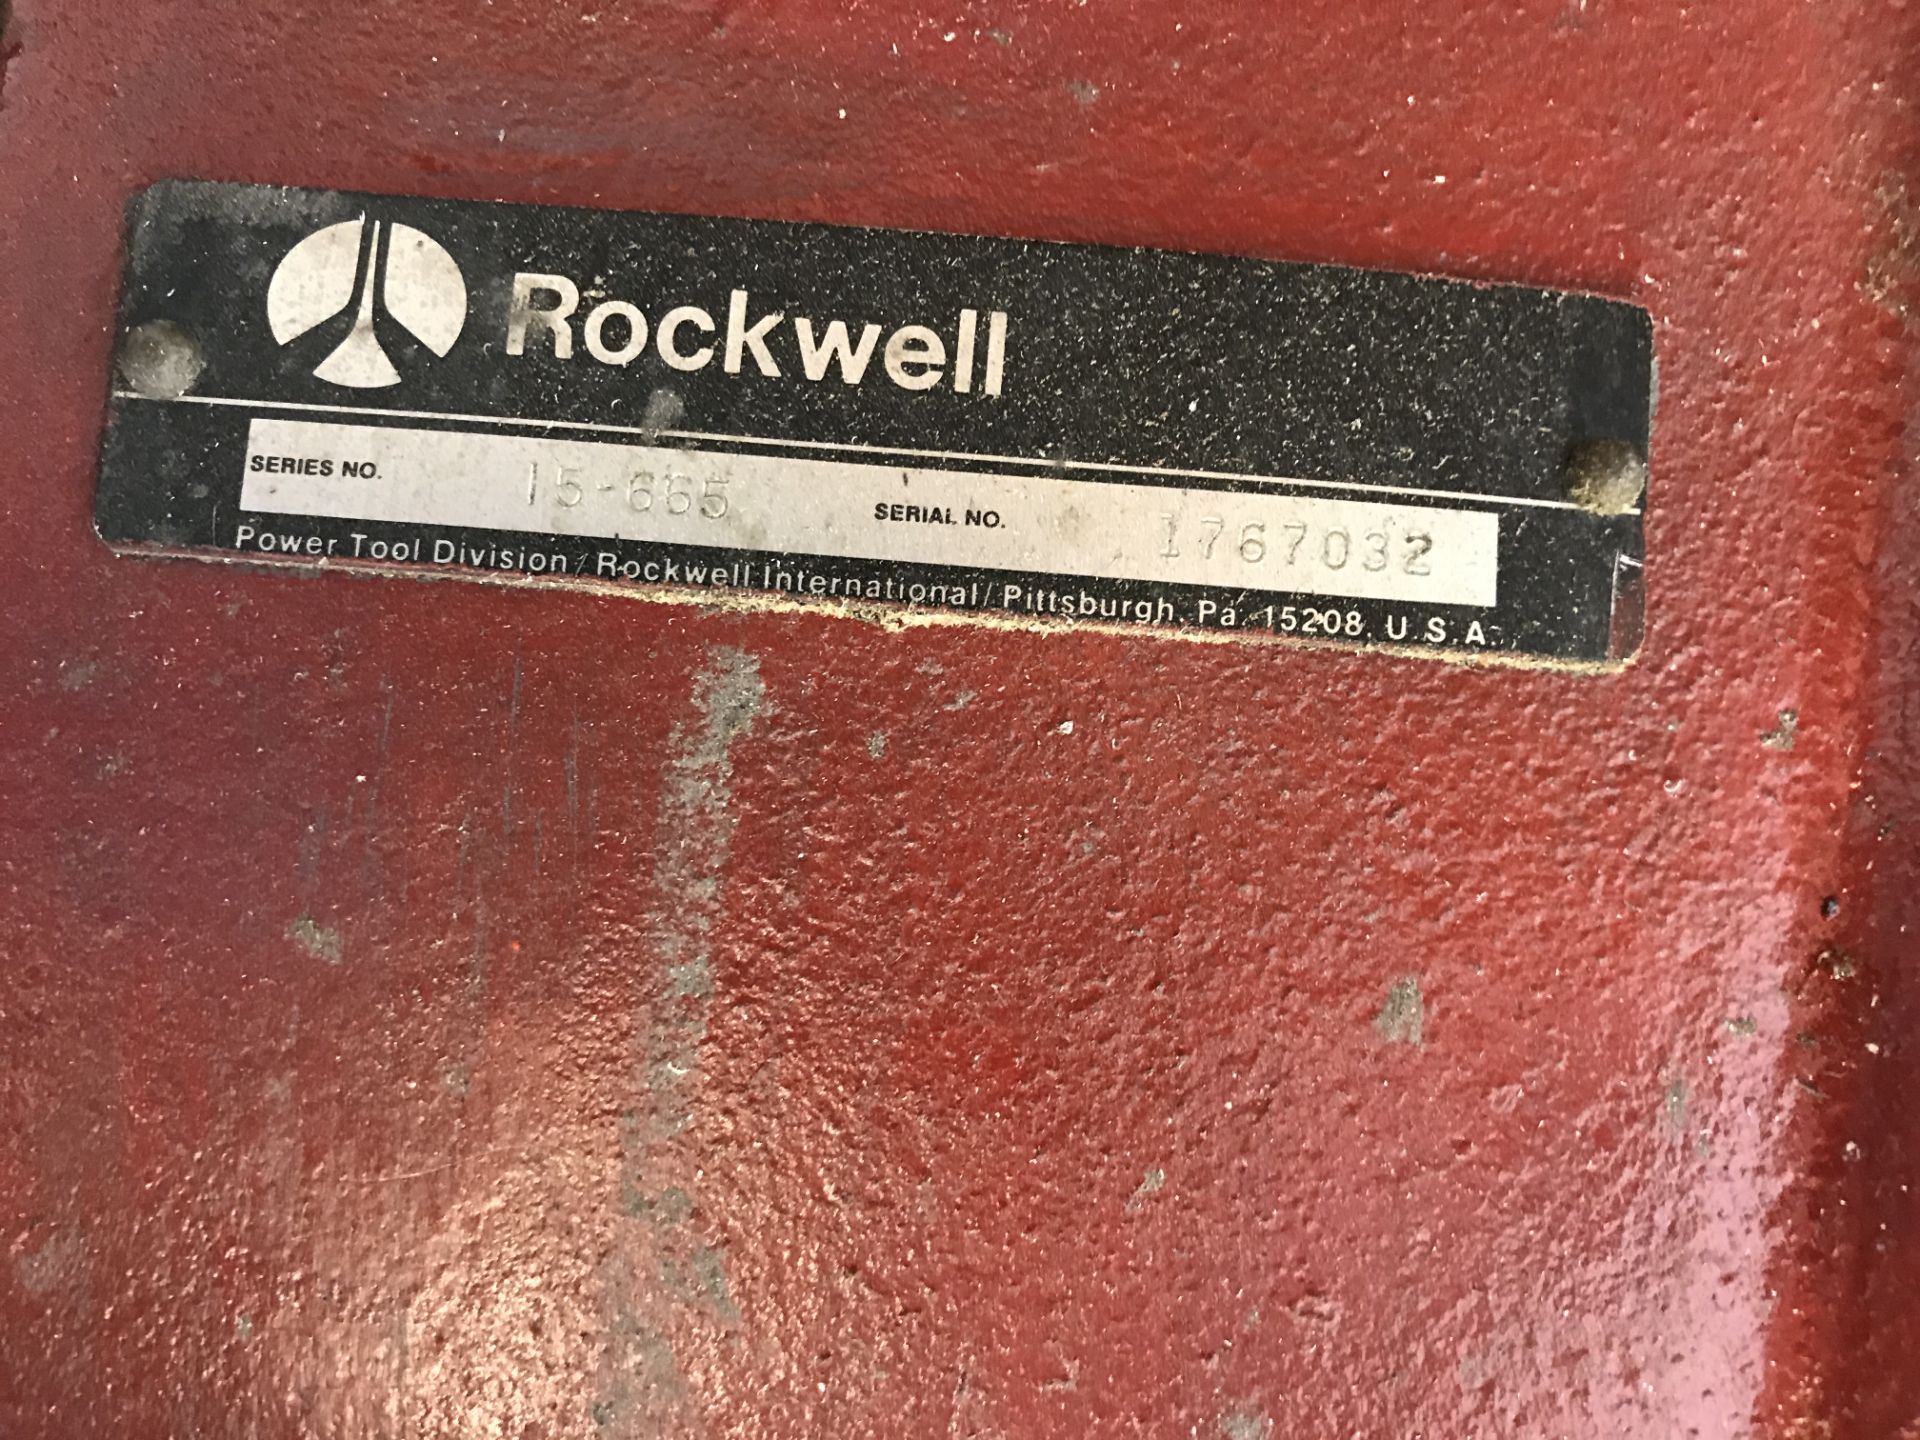 Rockwell Drill Press - Reverse Spot Face Setup; Model 15-665; Serial # 1767032; Includes Foot - Image 3 of 4